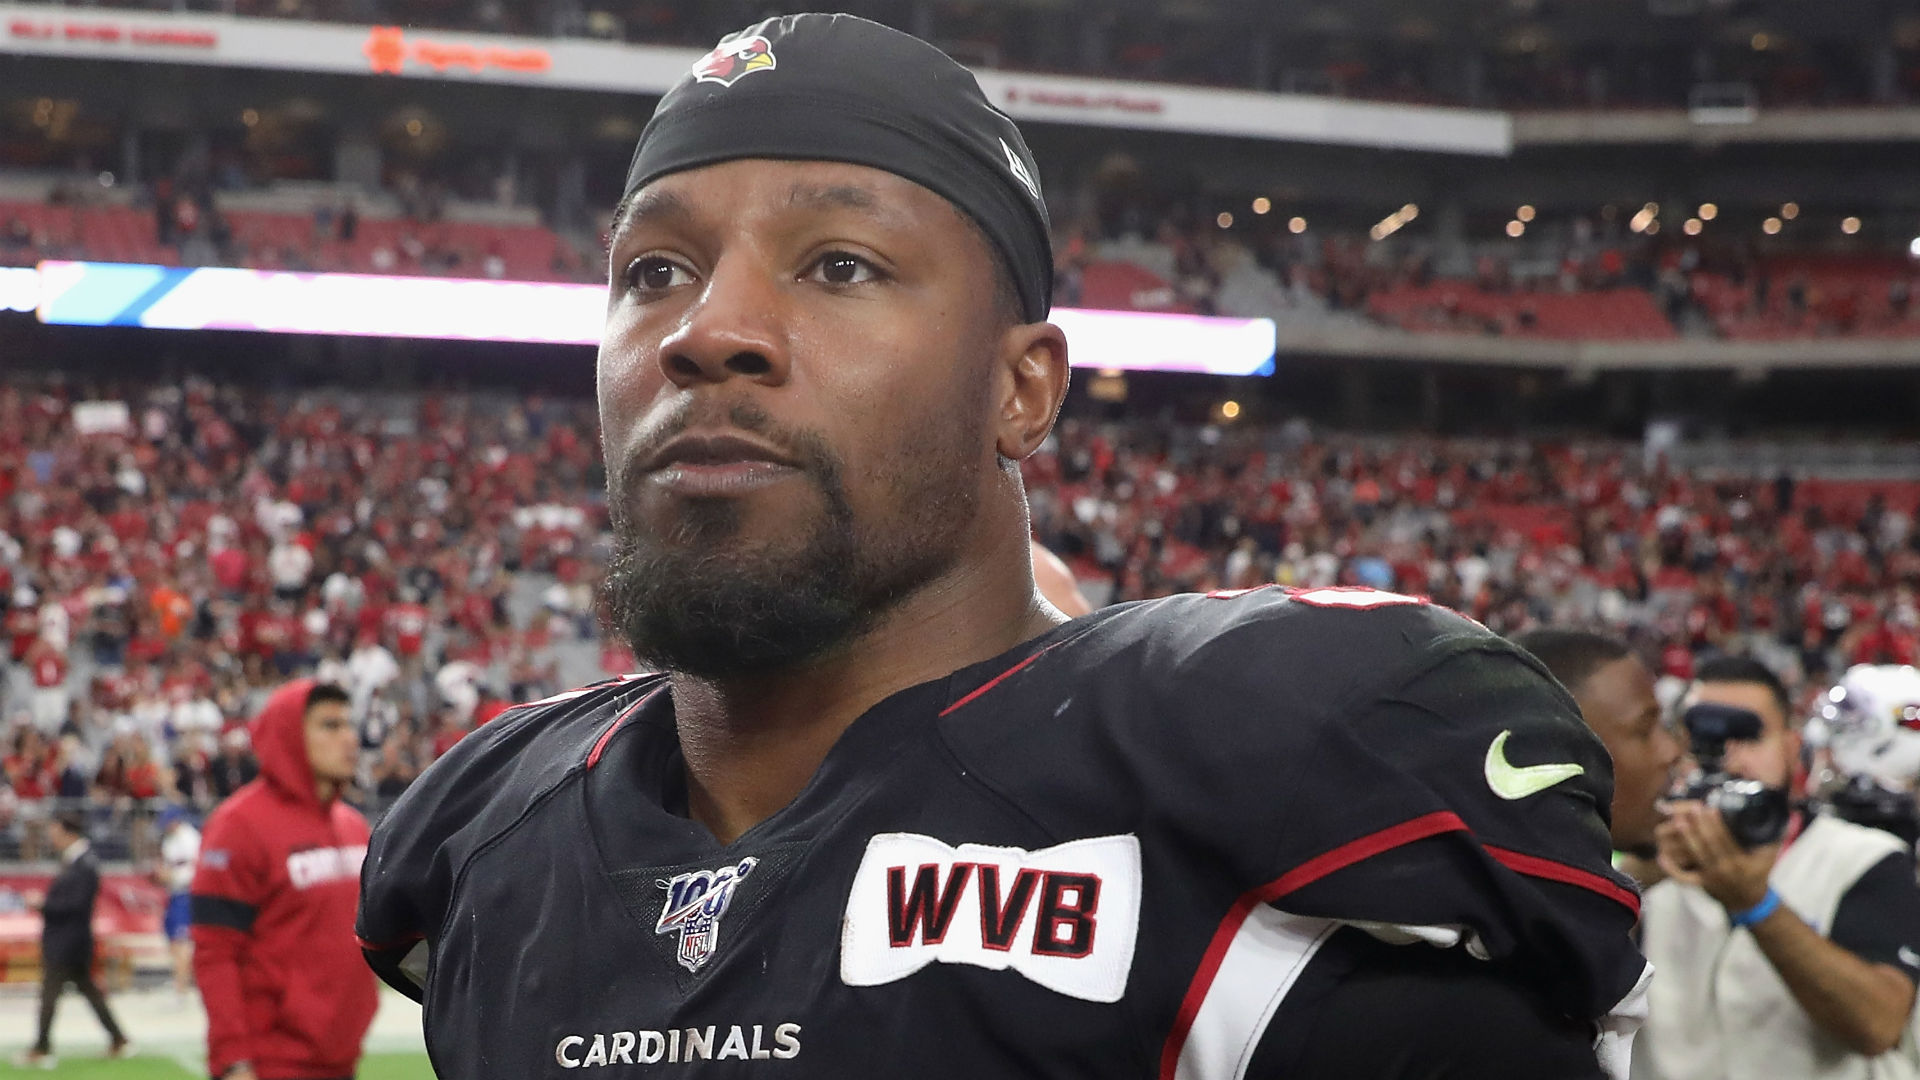 Arizona Cardinals general manager Steve Keim insisted running back David Johnson will not be cut, despite a disappointing 2019 NFL season.